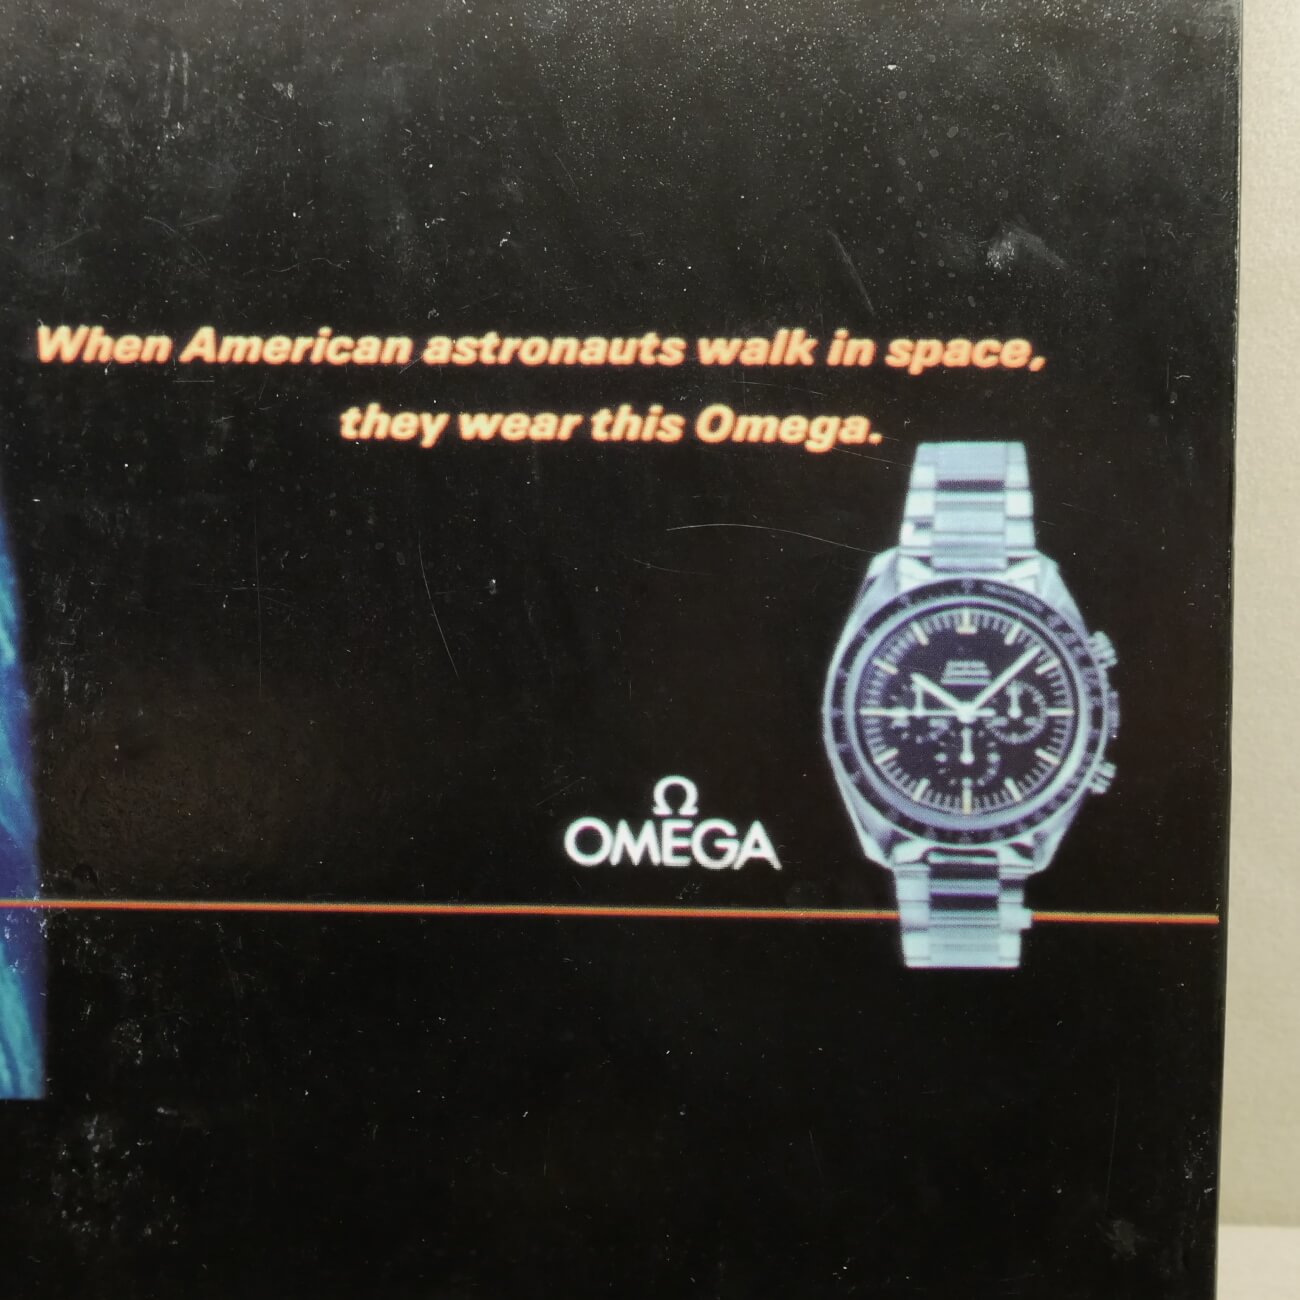 WATCH CASE & OTHER OMEGA ADVERTISING BOARD